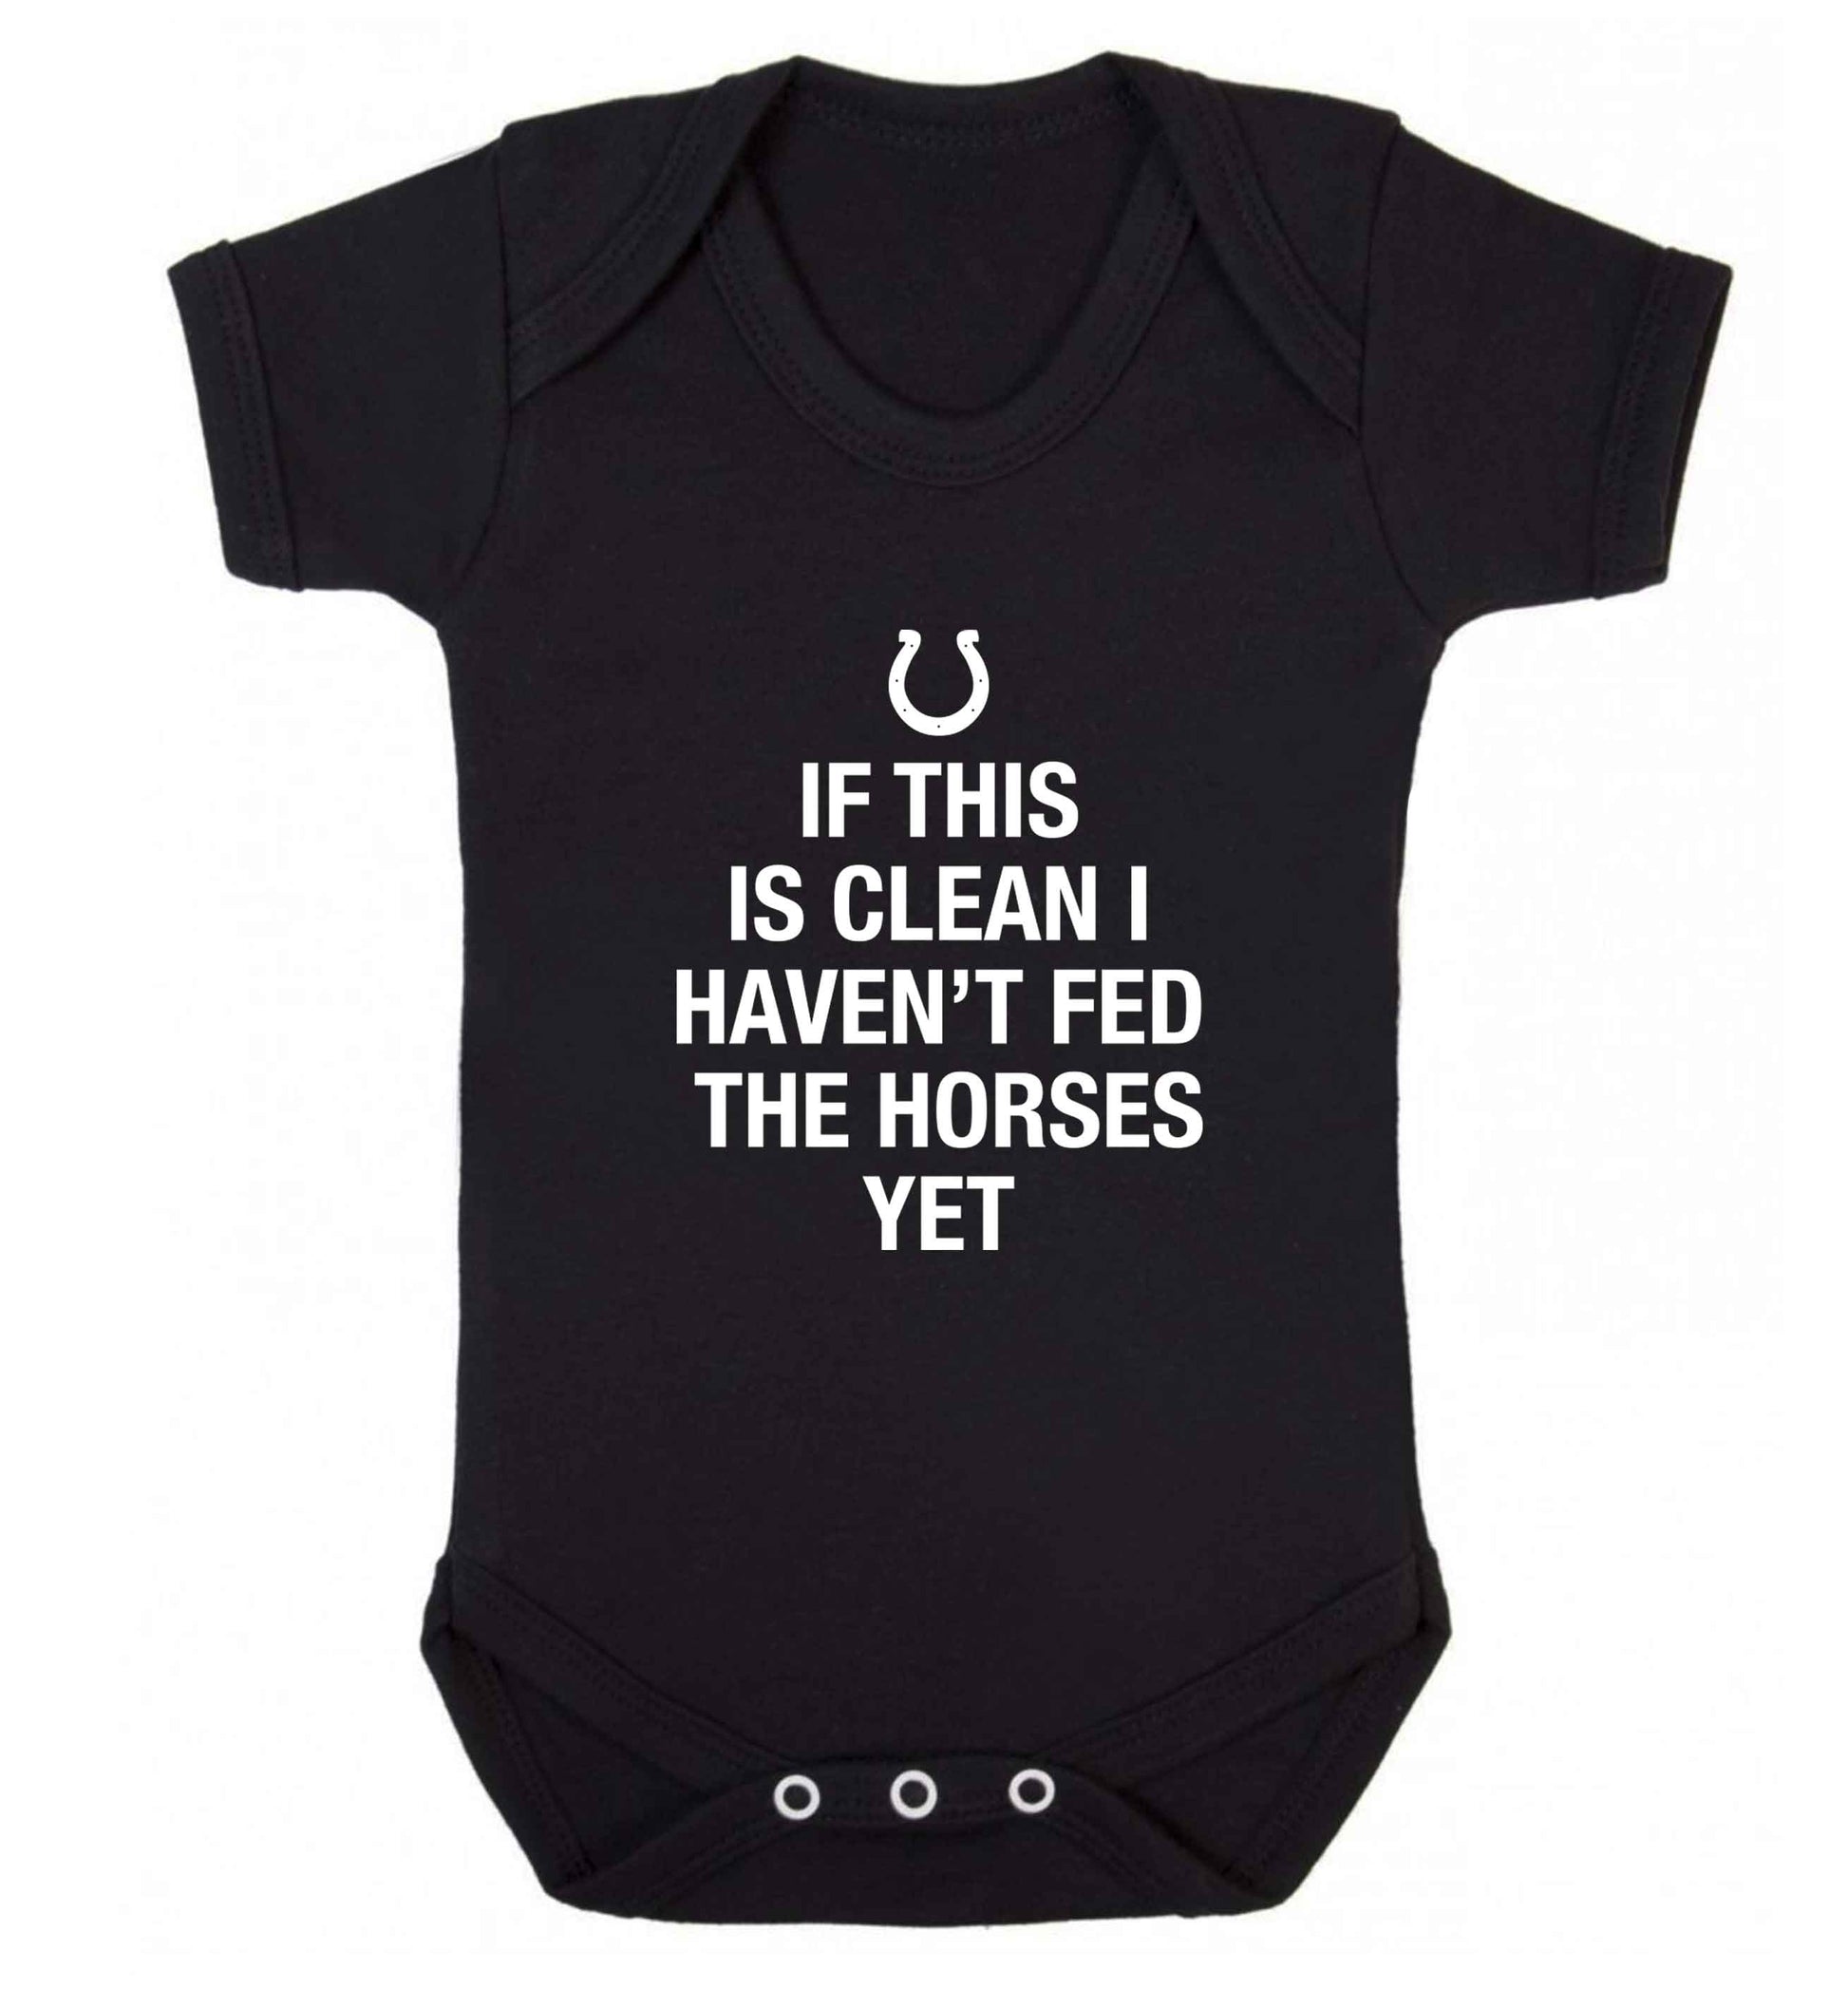 If this isn't clean I haven't fed the horses yet baby vest black 18-24 months